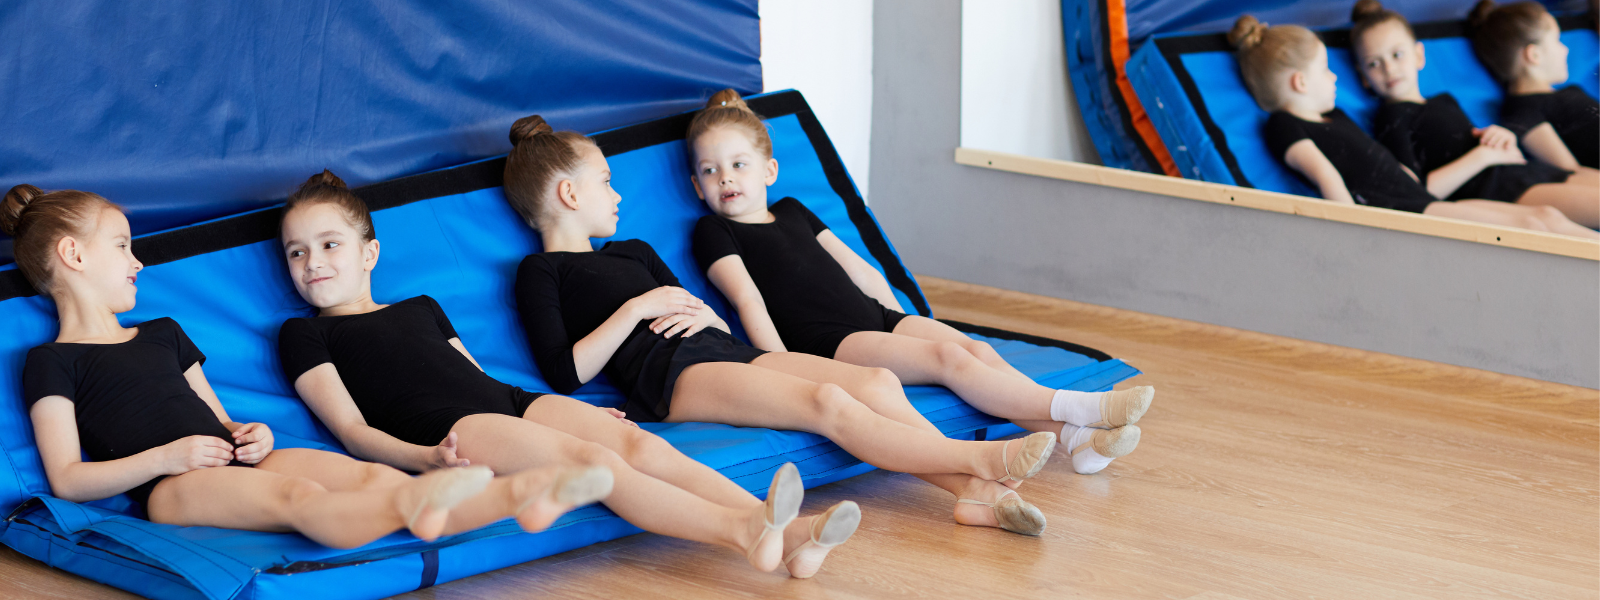 Protect Your Gymnasts with High-Quality Safety and Landing Mats